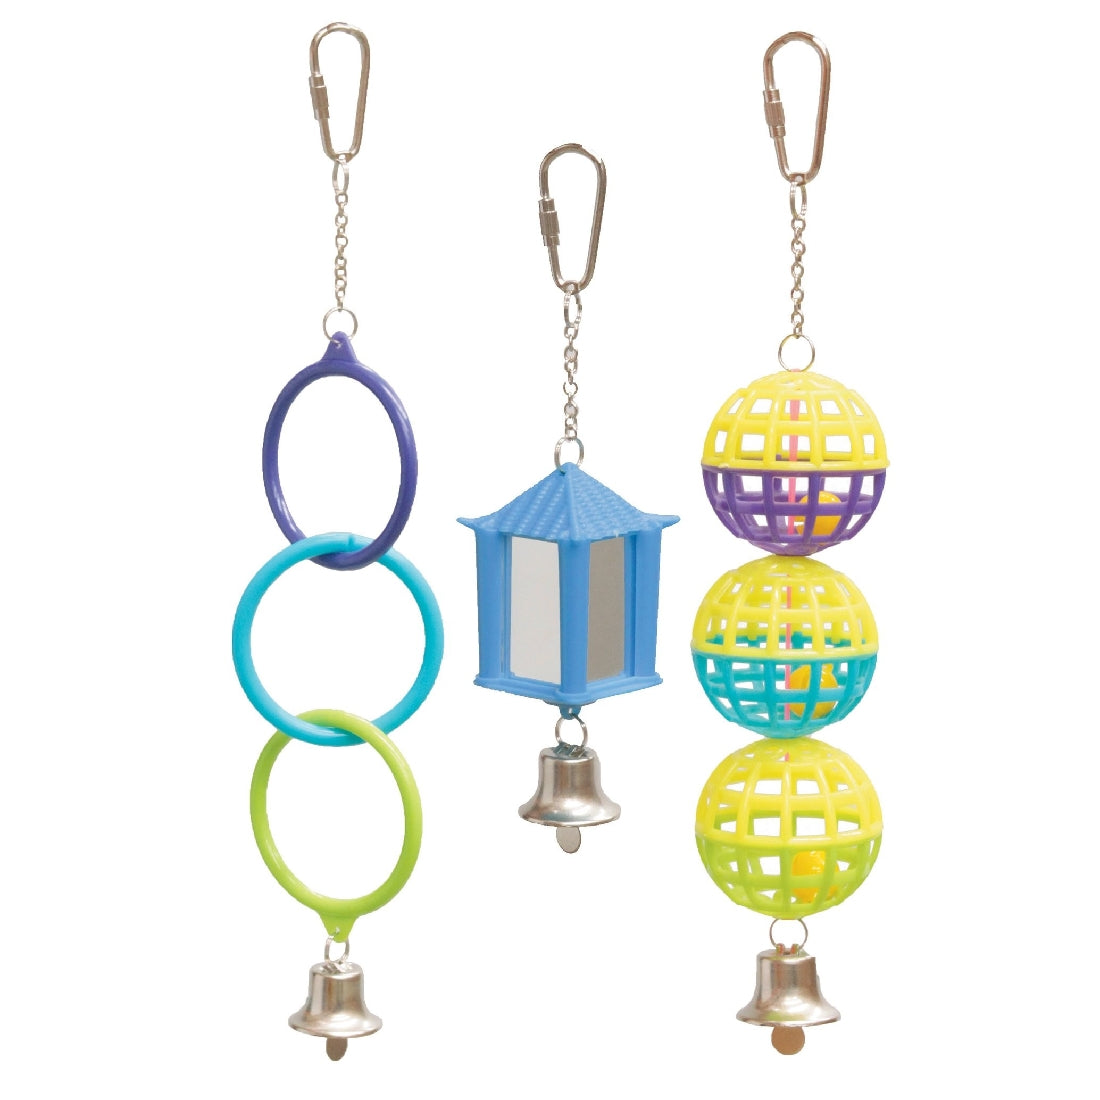 Three colorful hanging bird toys with rings, bells, and mirrors.